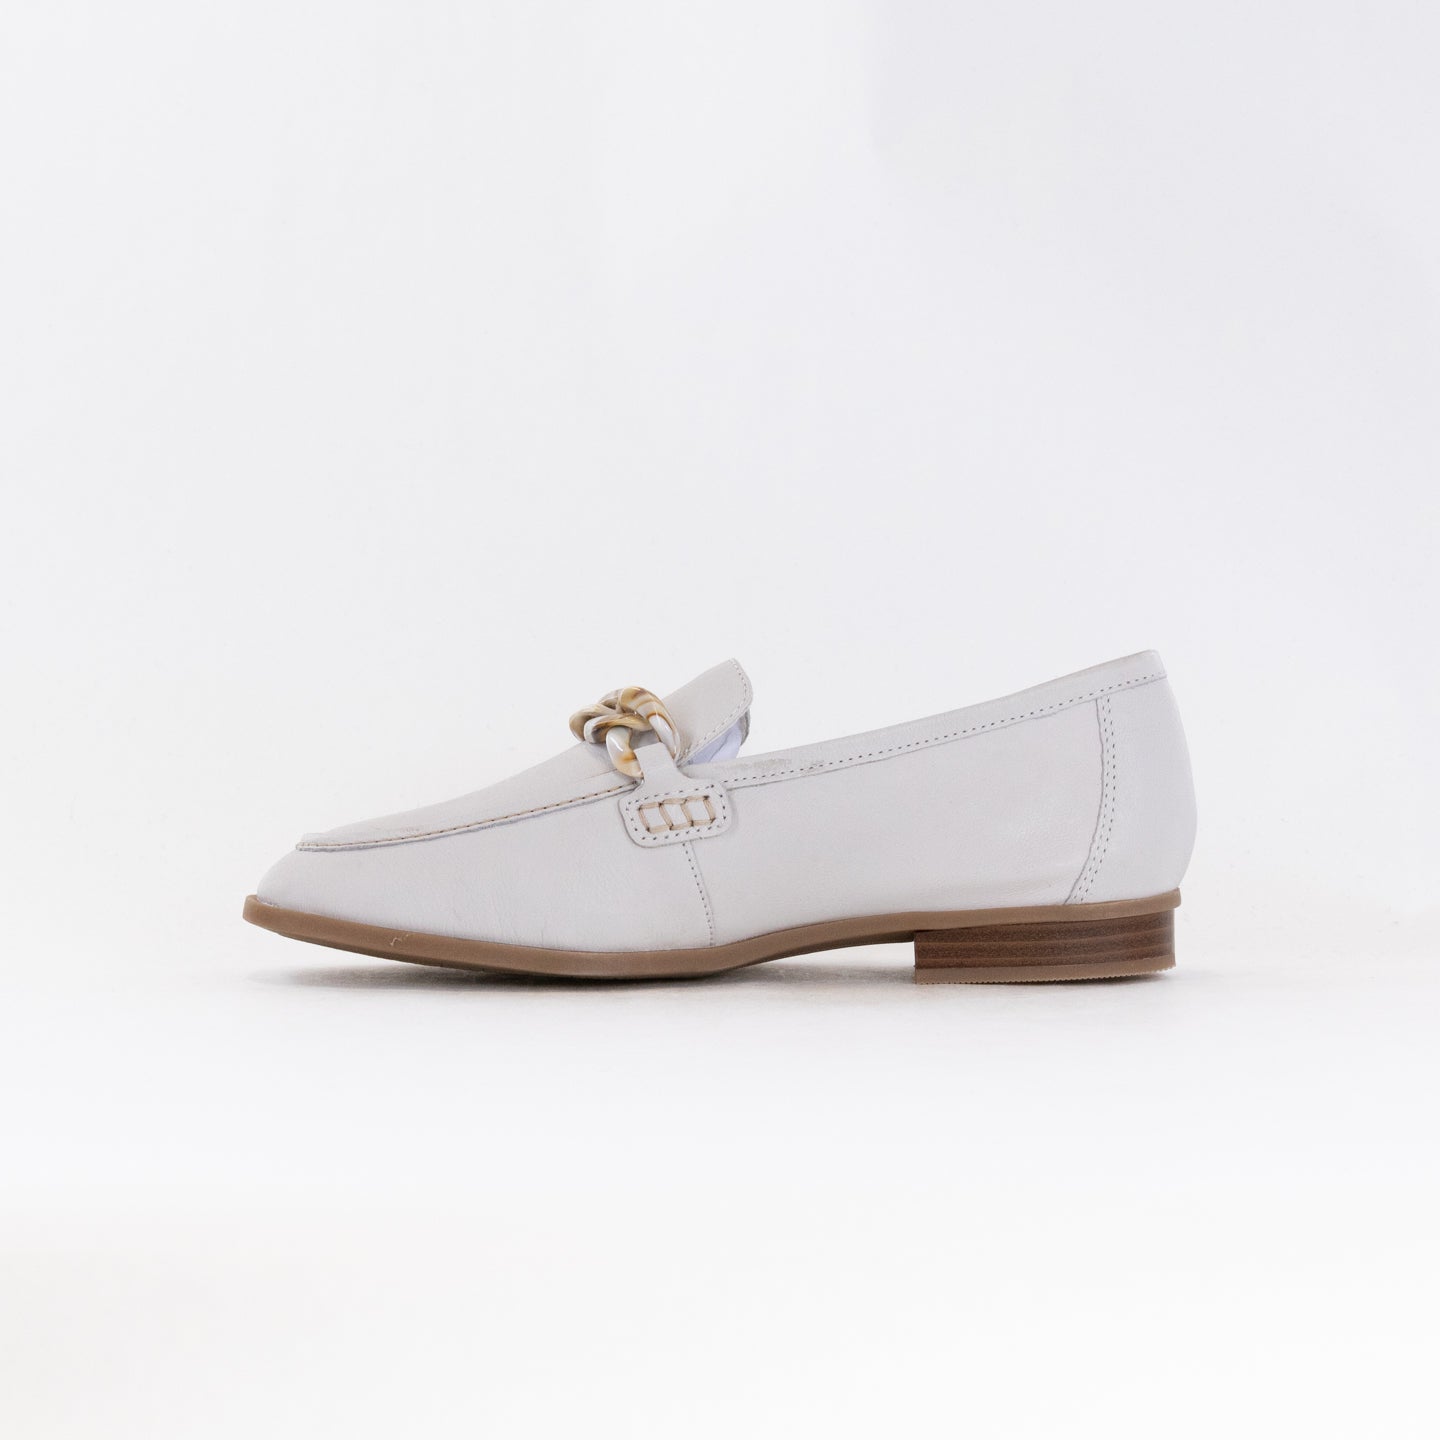 Clarks Sarafyna Iris Loafer (Women's) - White Leather